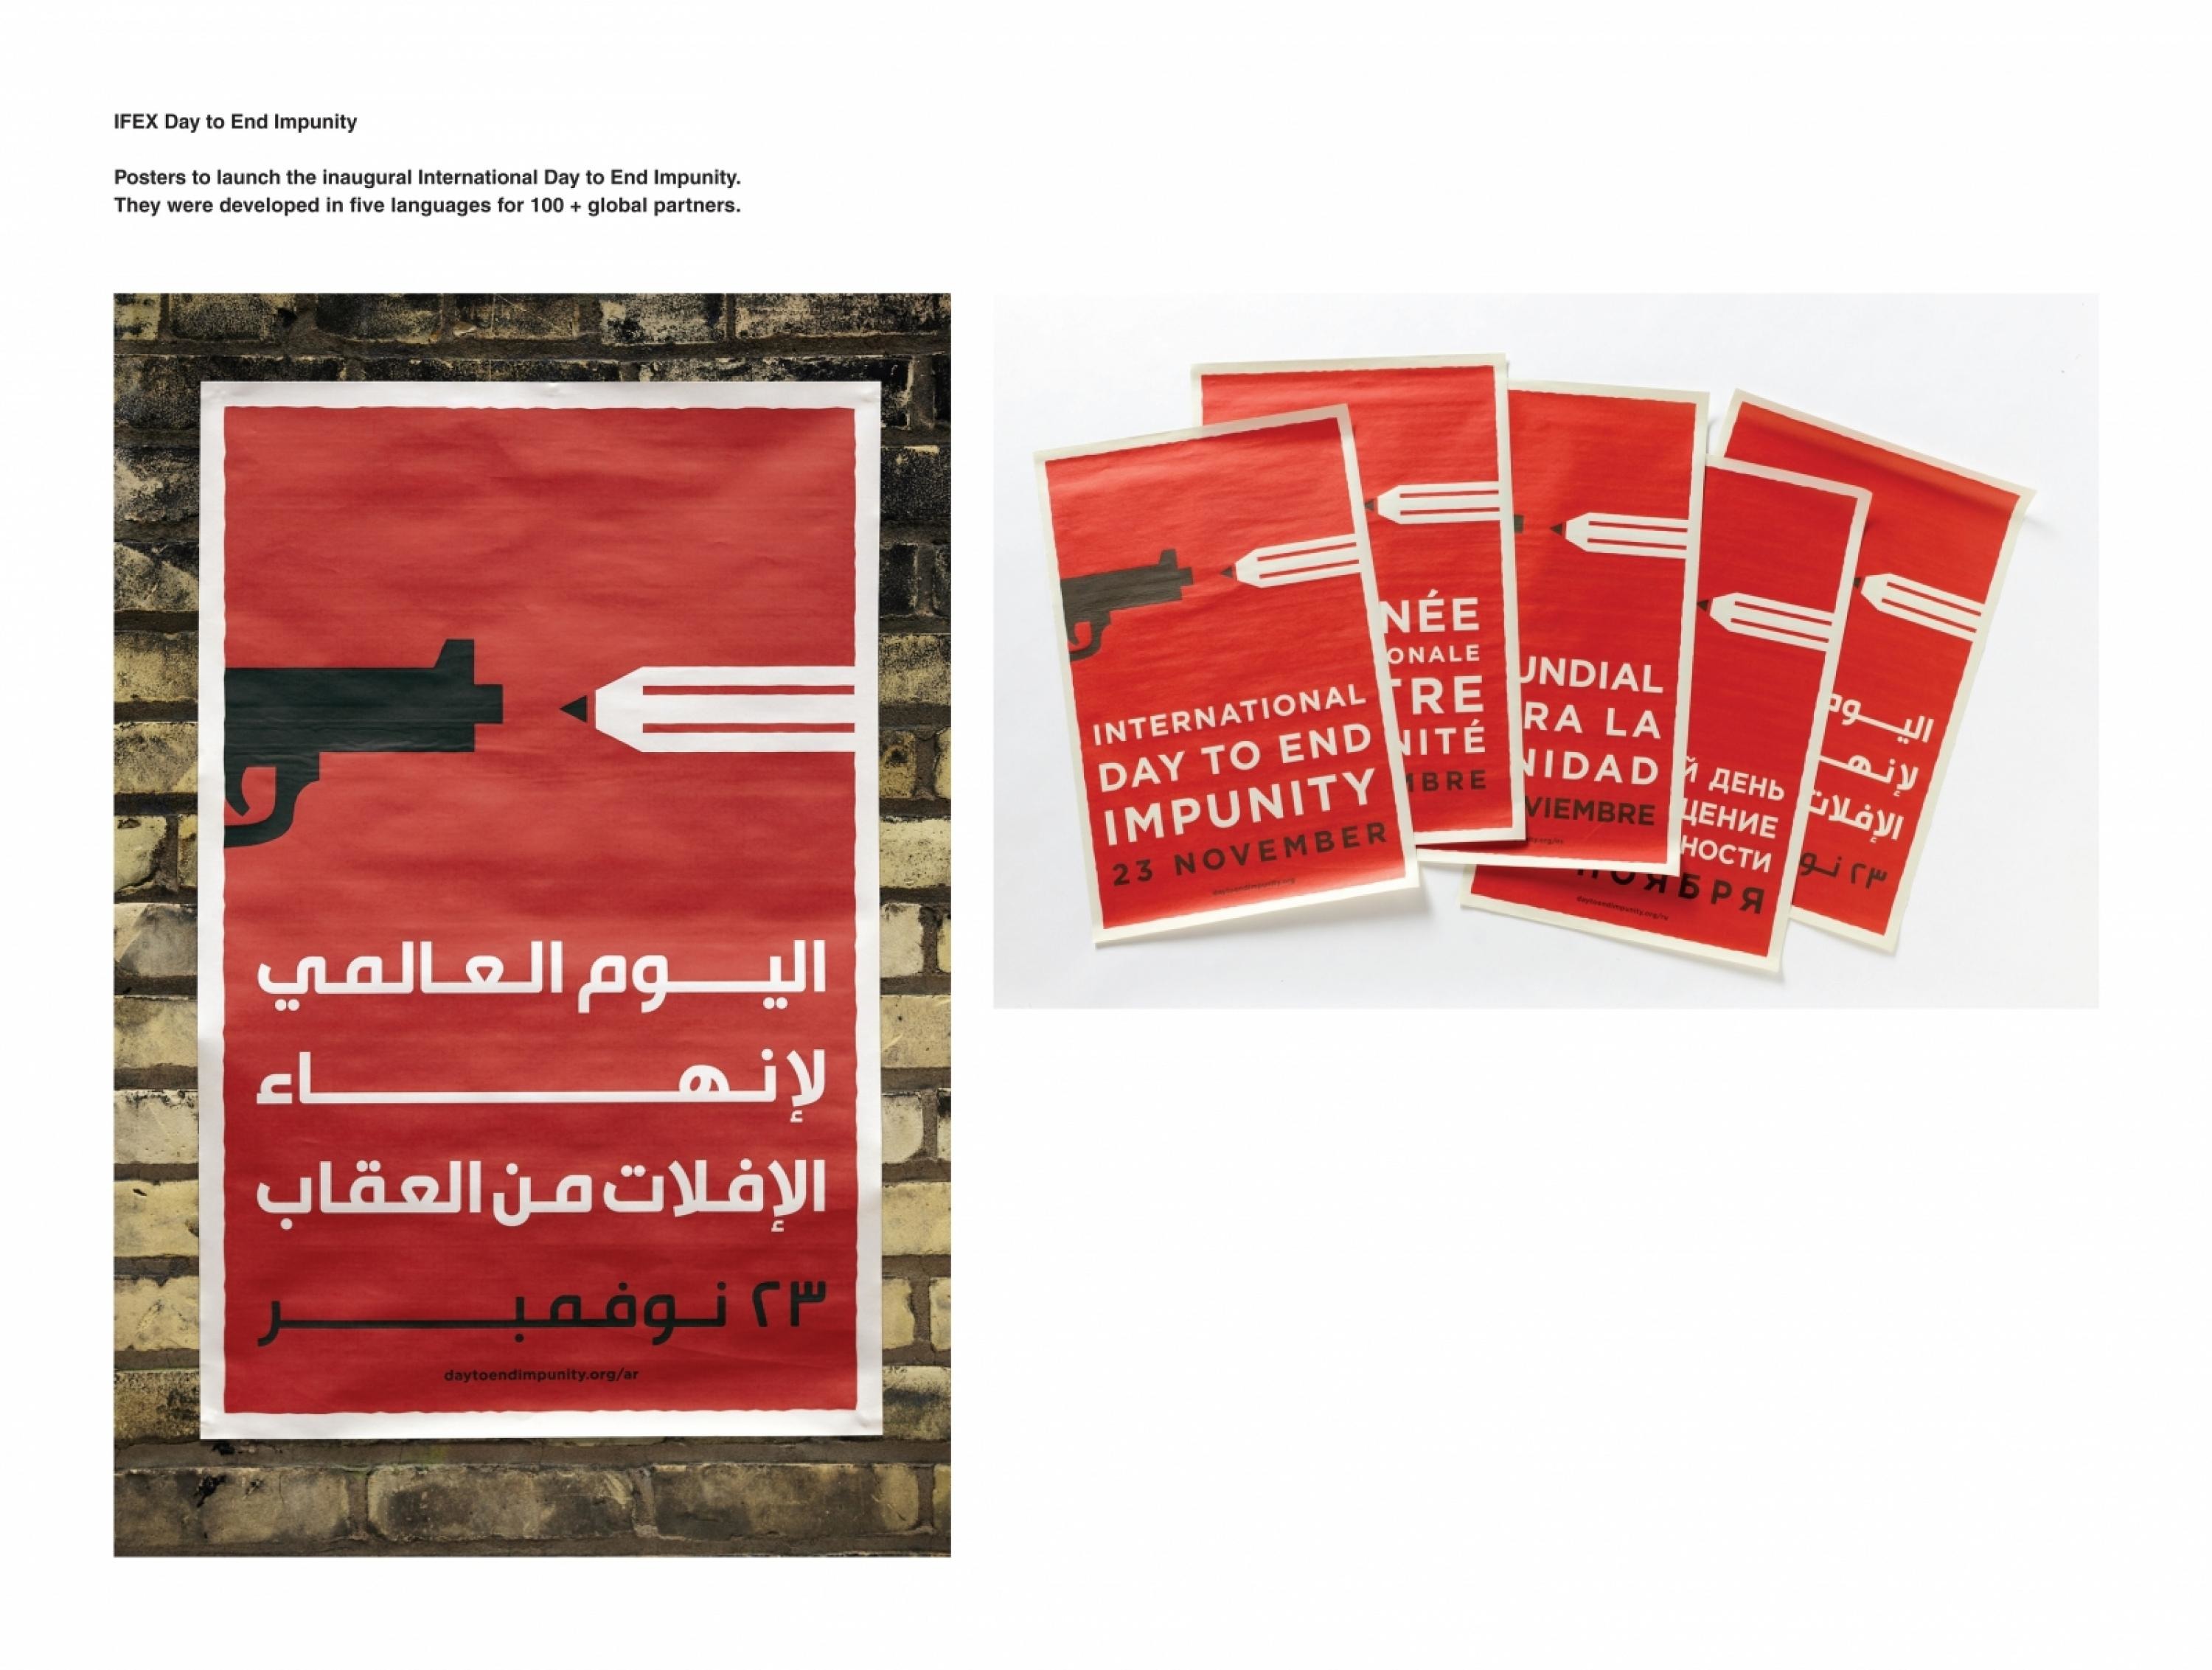 IFEX POSTERS